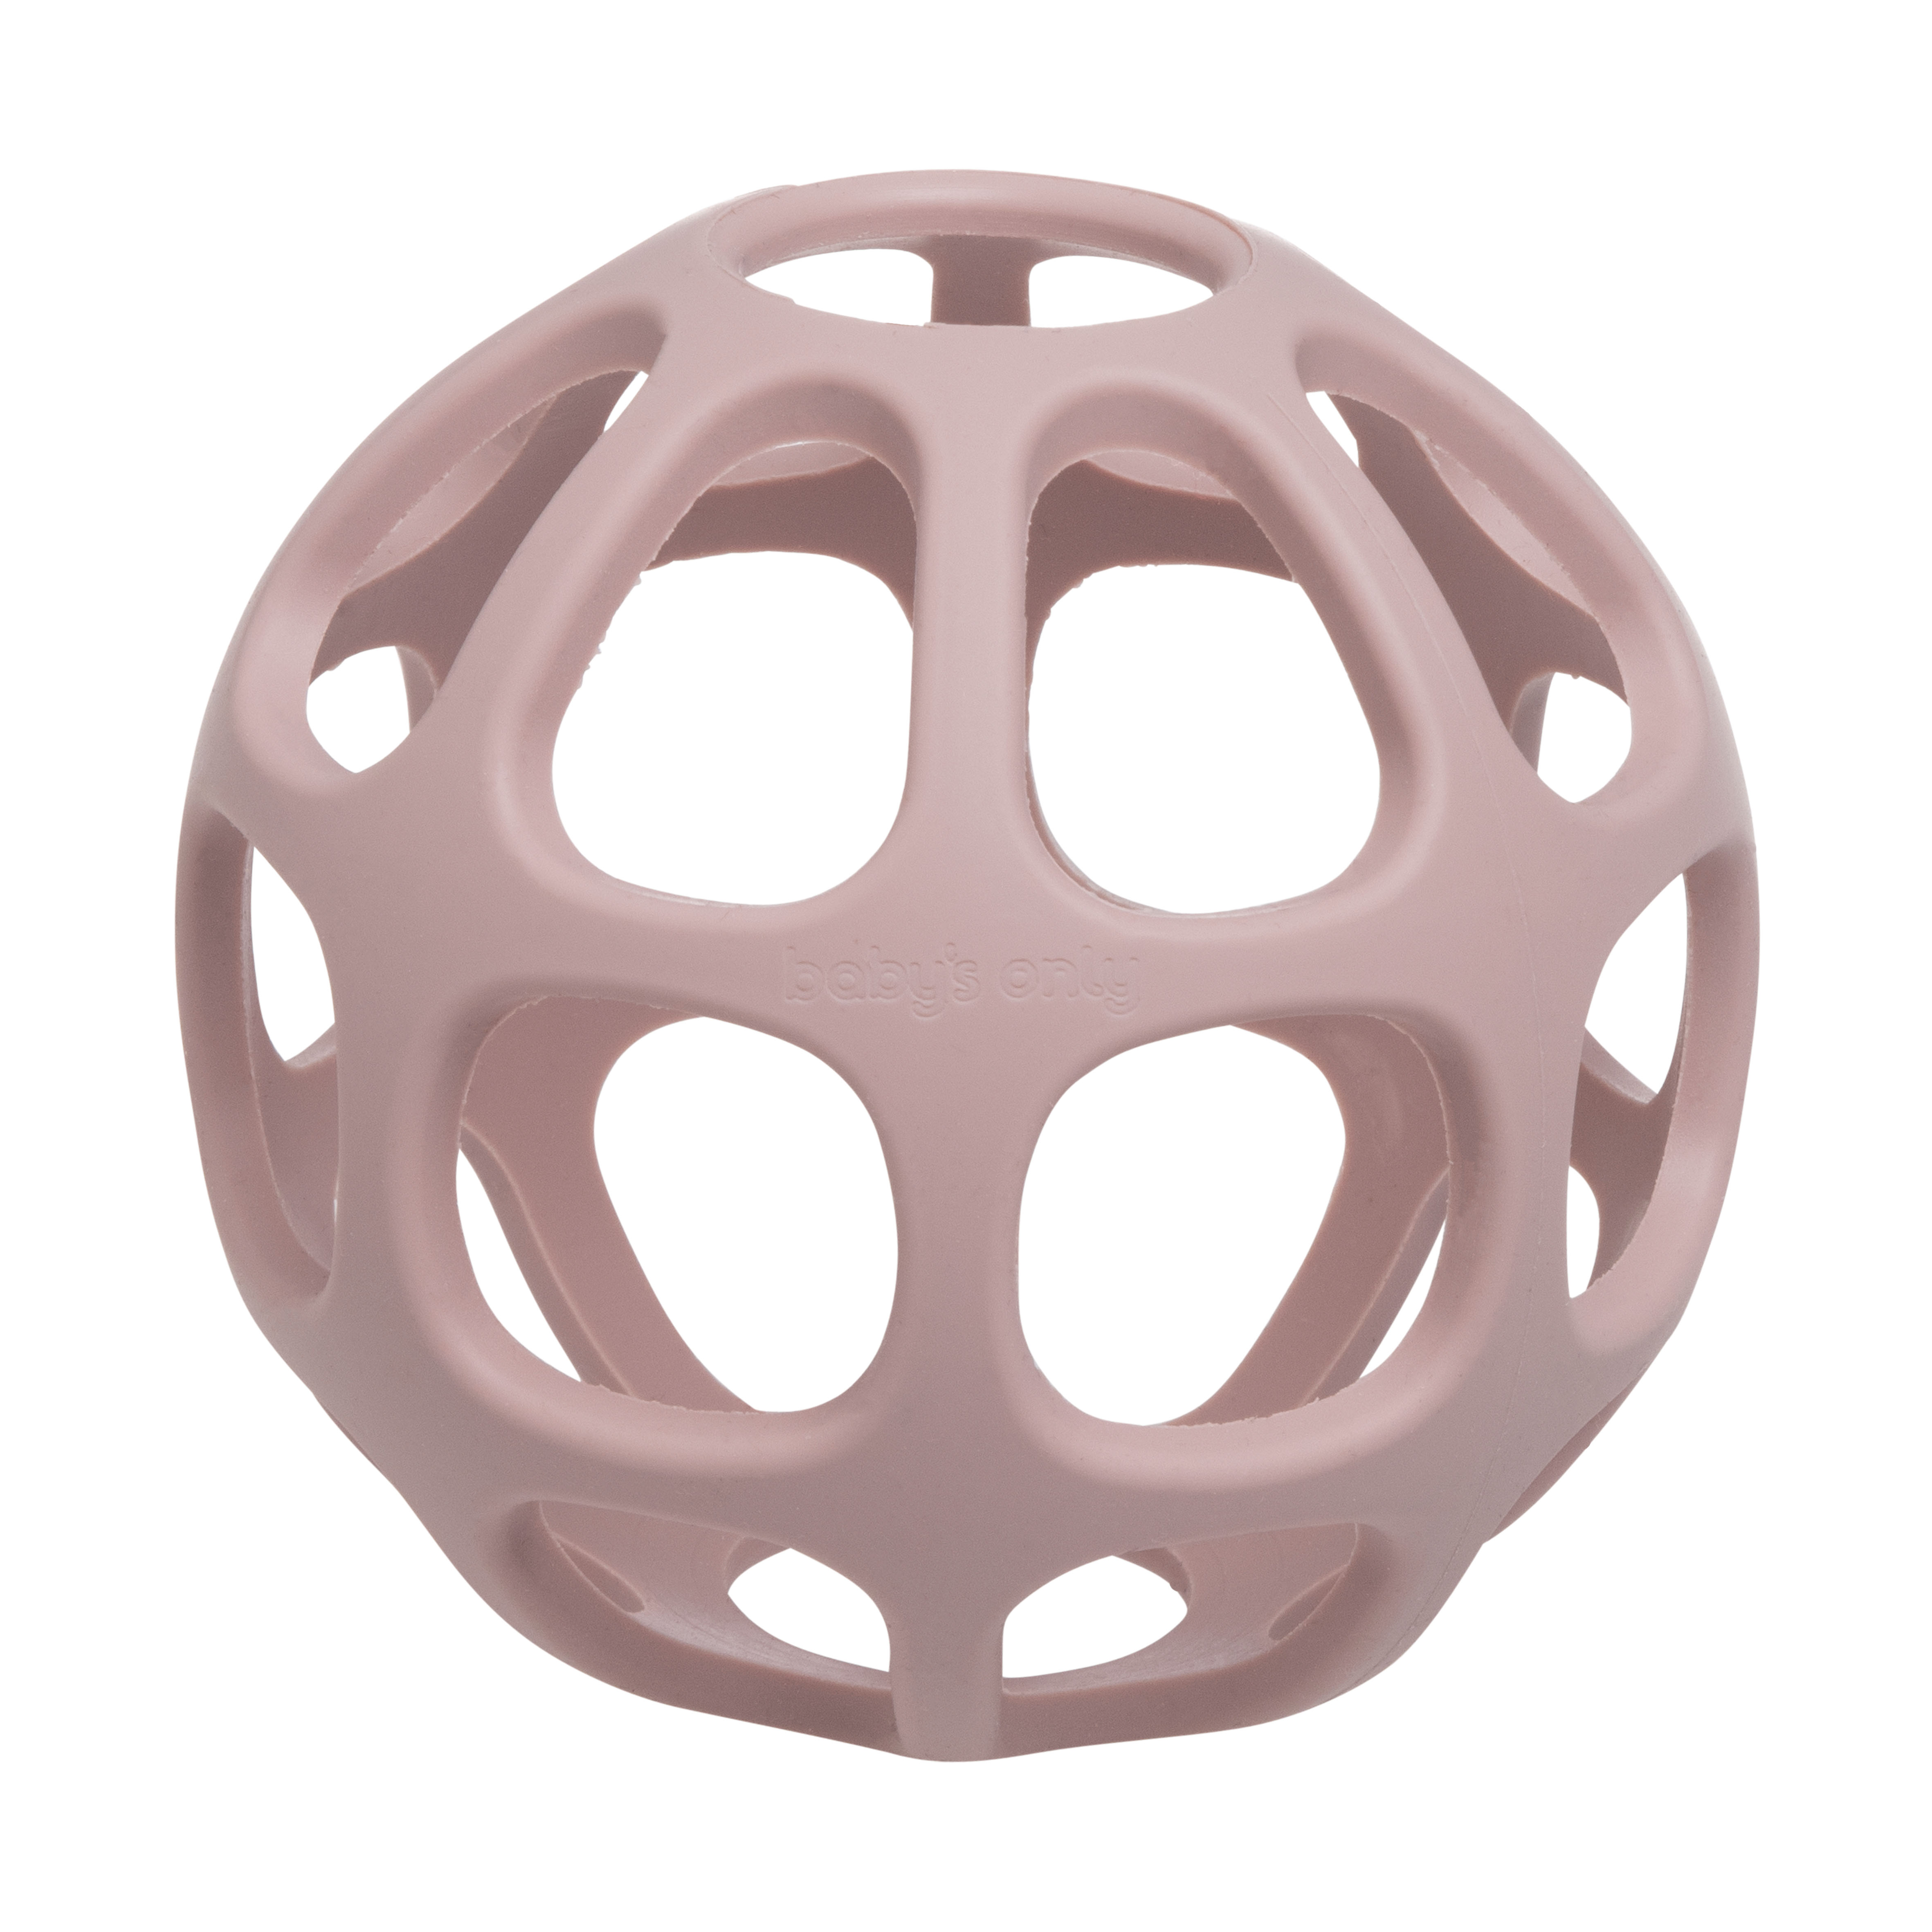 Toy ball old pink